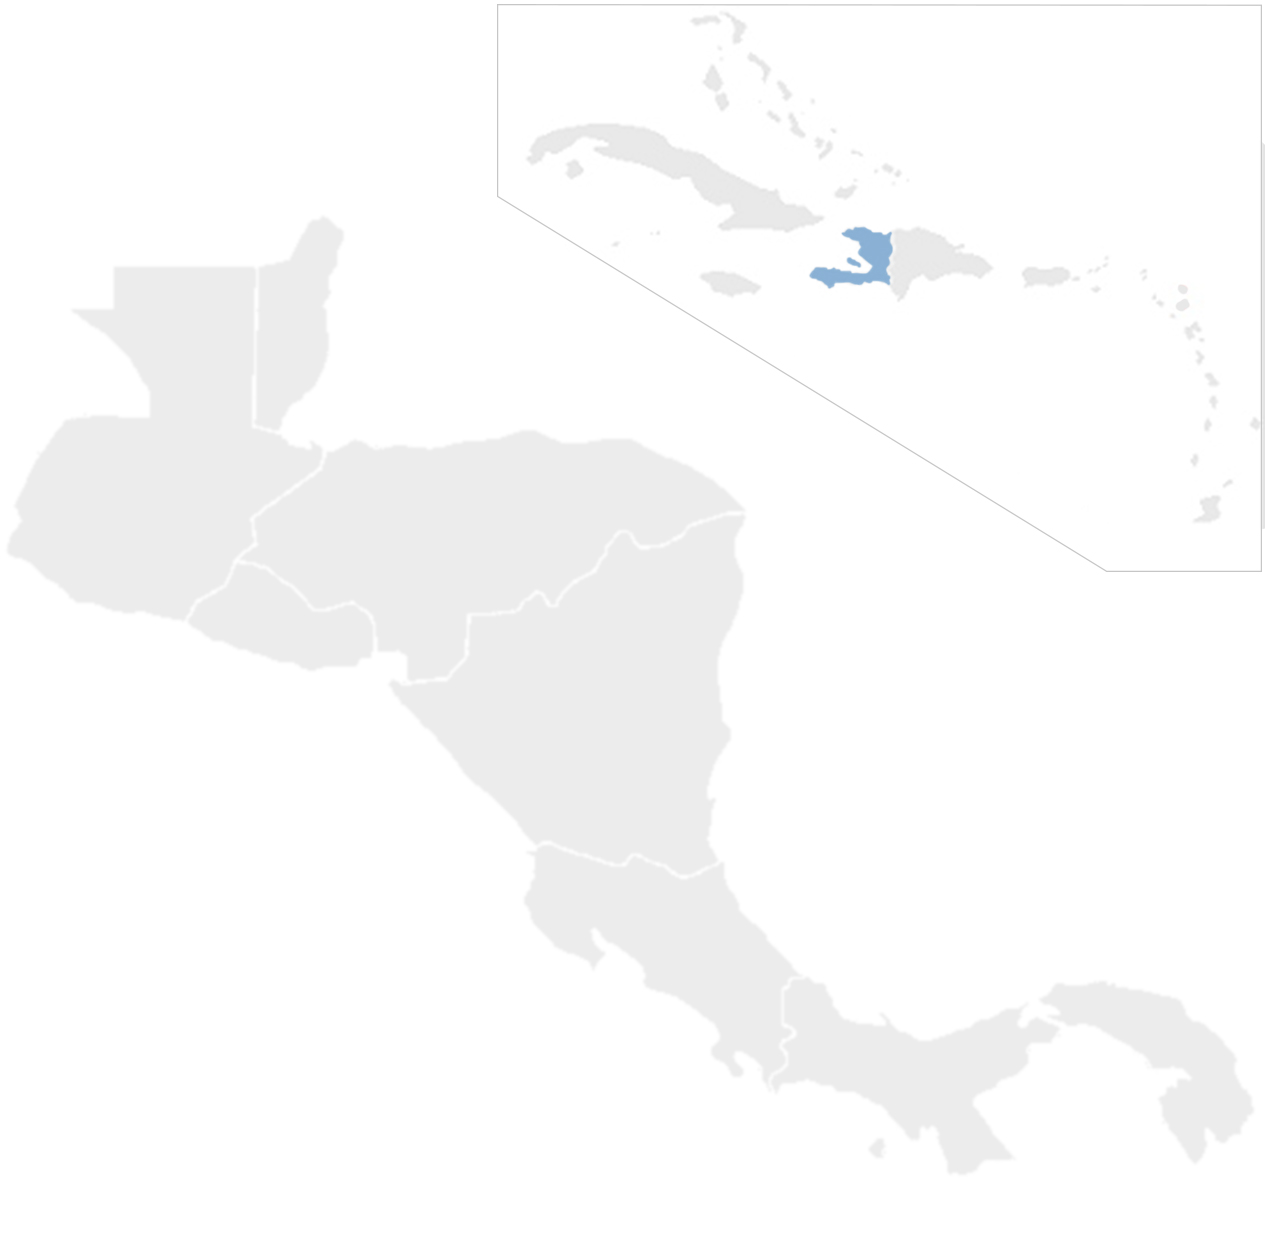 Gray map of Central America and the Caribbean with Haiti in blue